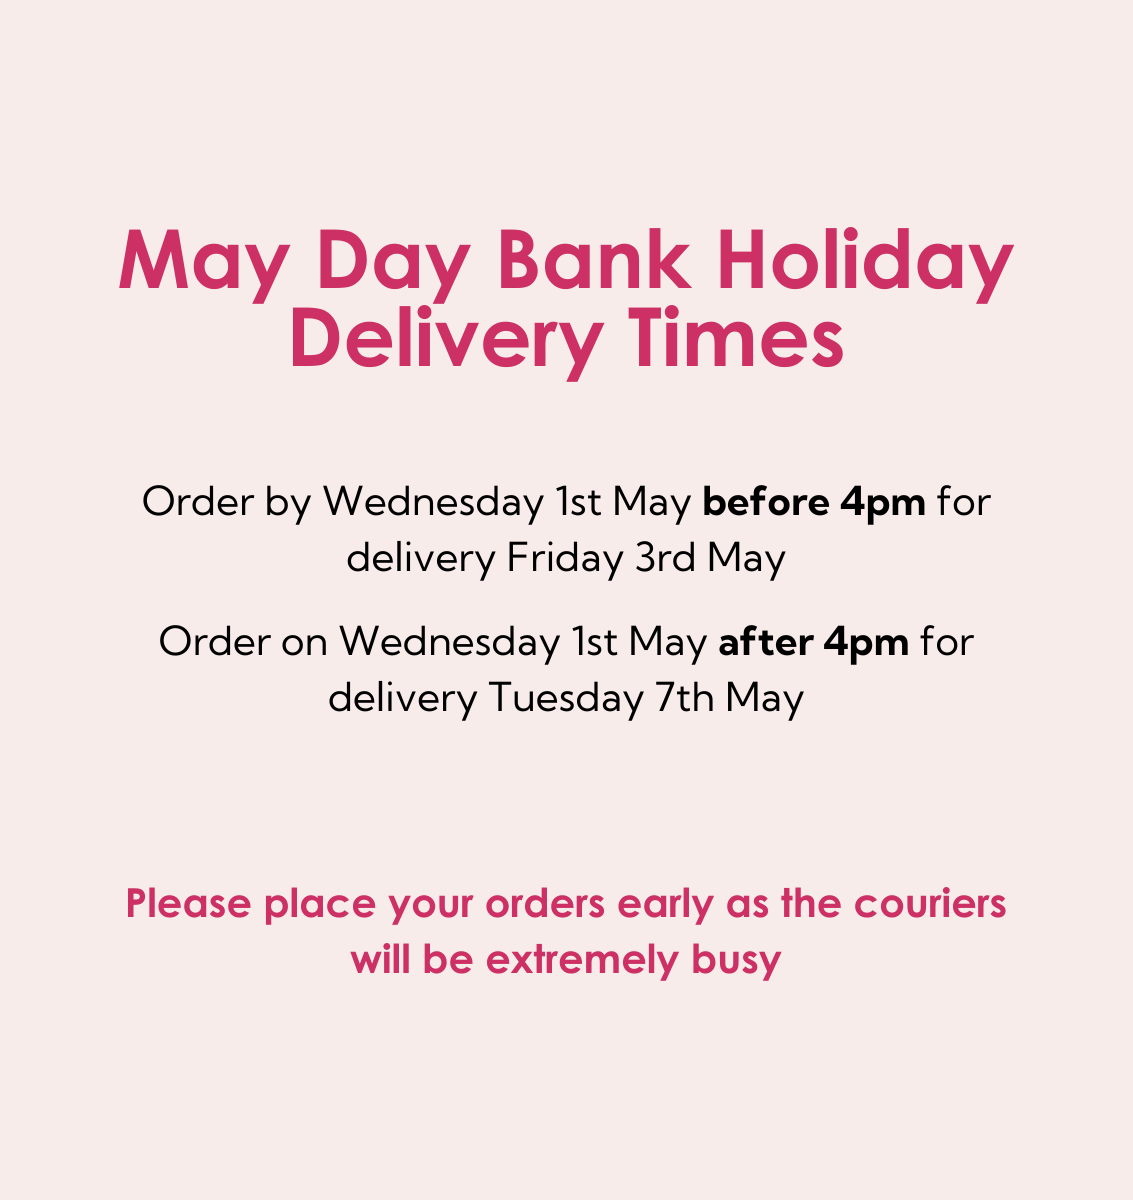 Bank holiday delivery details